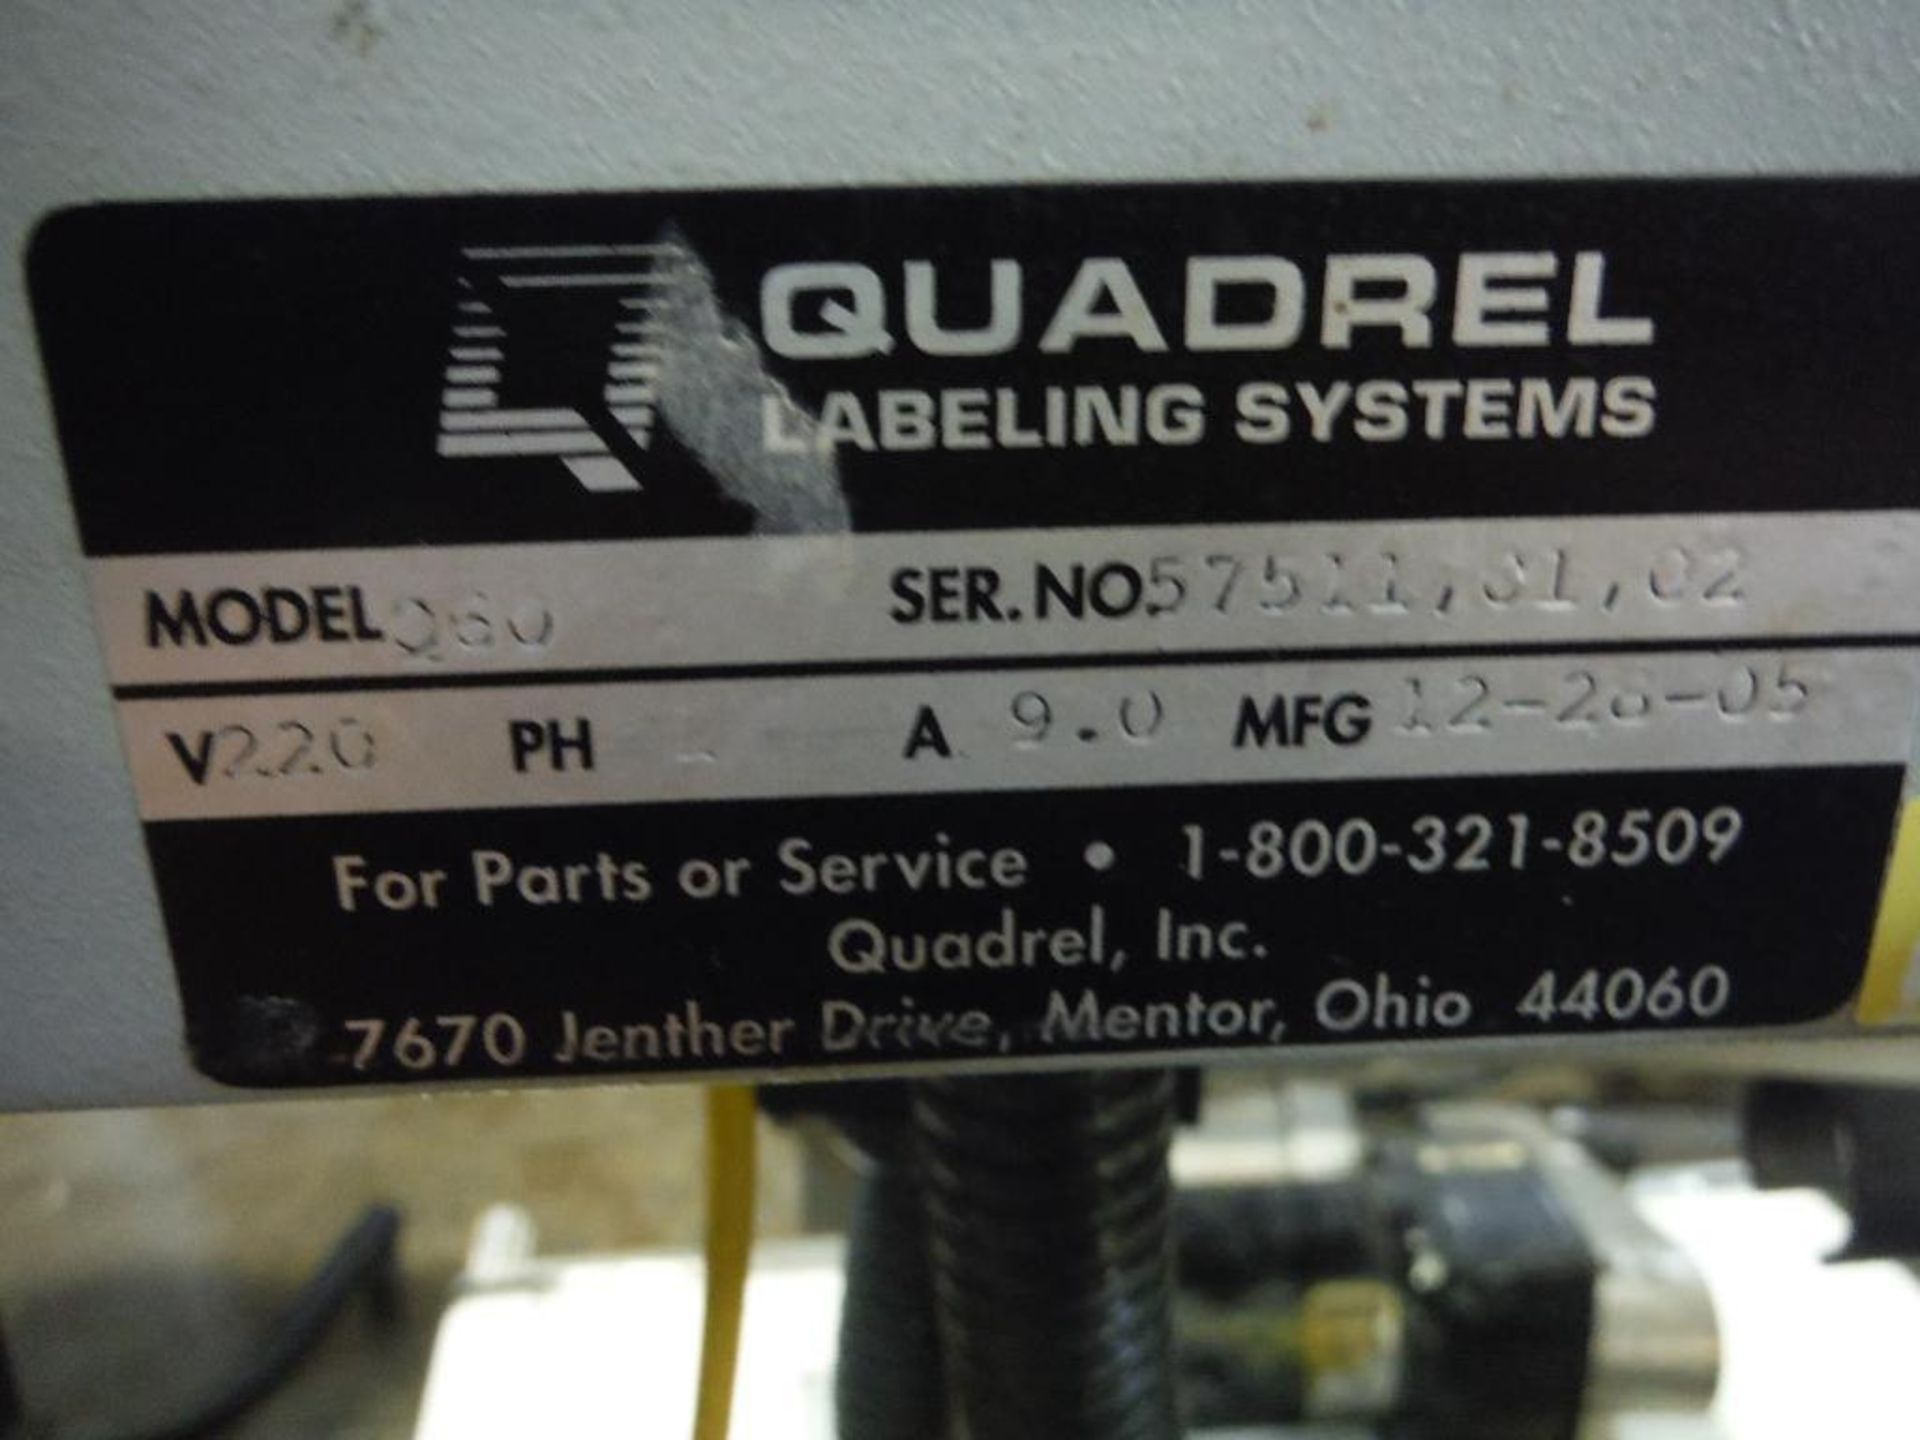 2005 Quadrel Labeling Systems labeler, Model 060, SN 57511,S1,02, 10.5 in. wide belt, on casters ** - Image 6 of 9